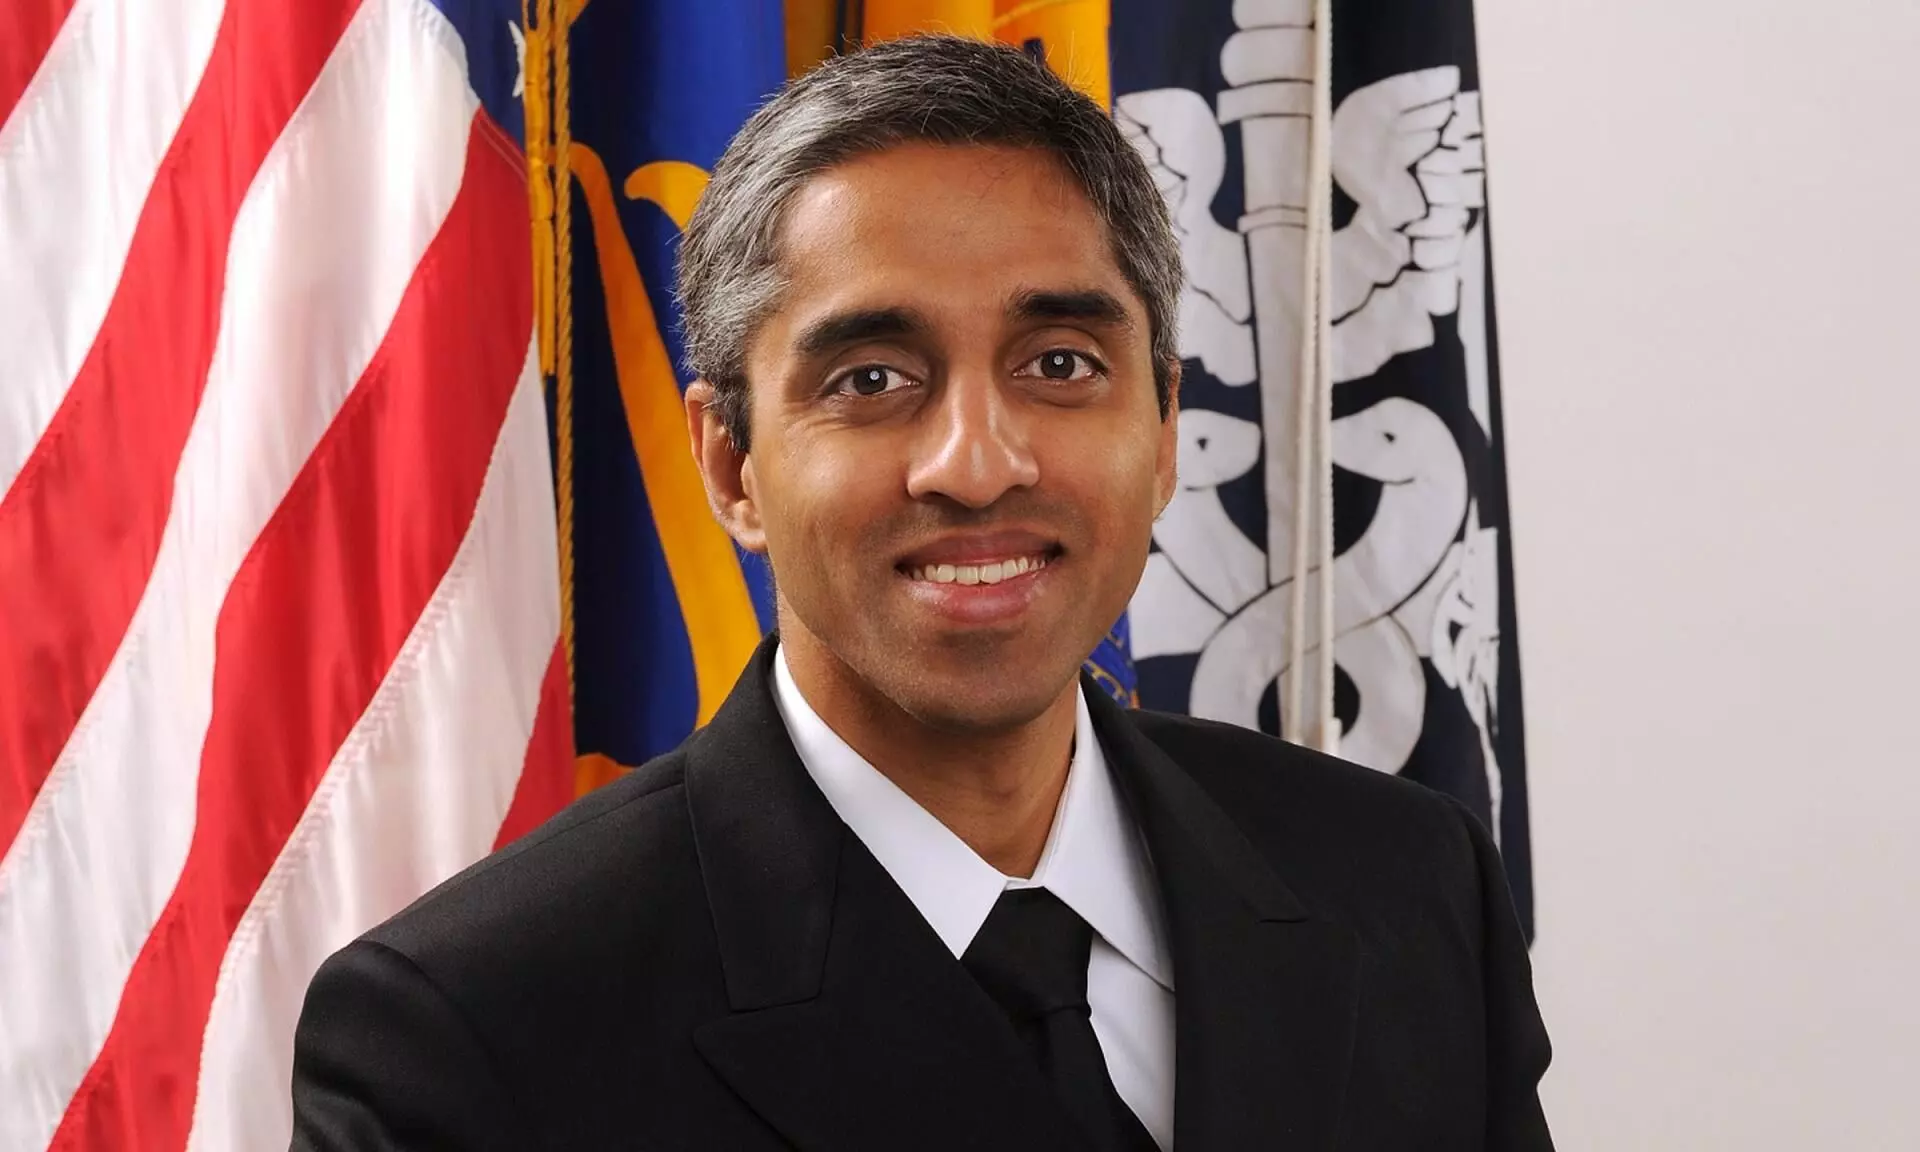 Grandson of a poor farmer in India: Vivek Murthy re-introduces himself to America